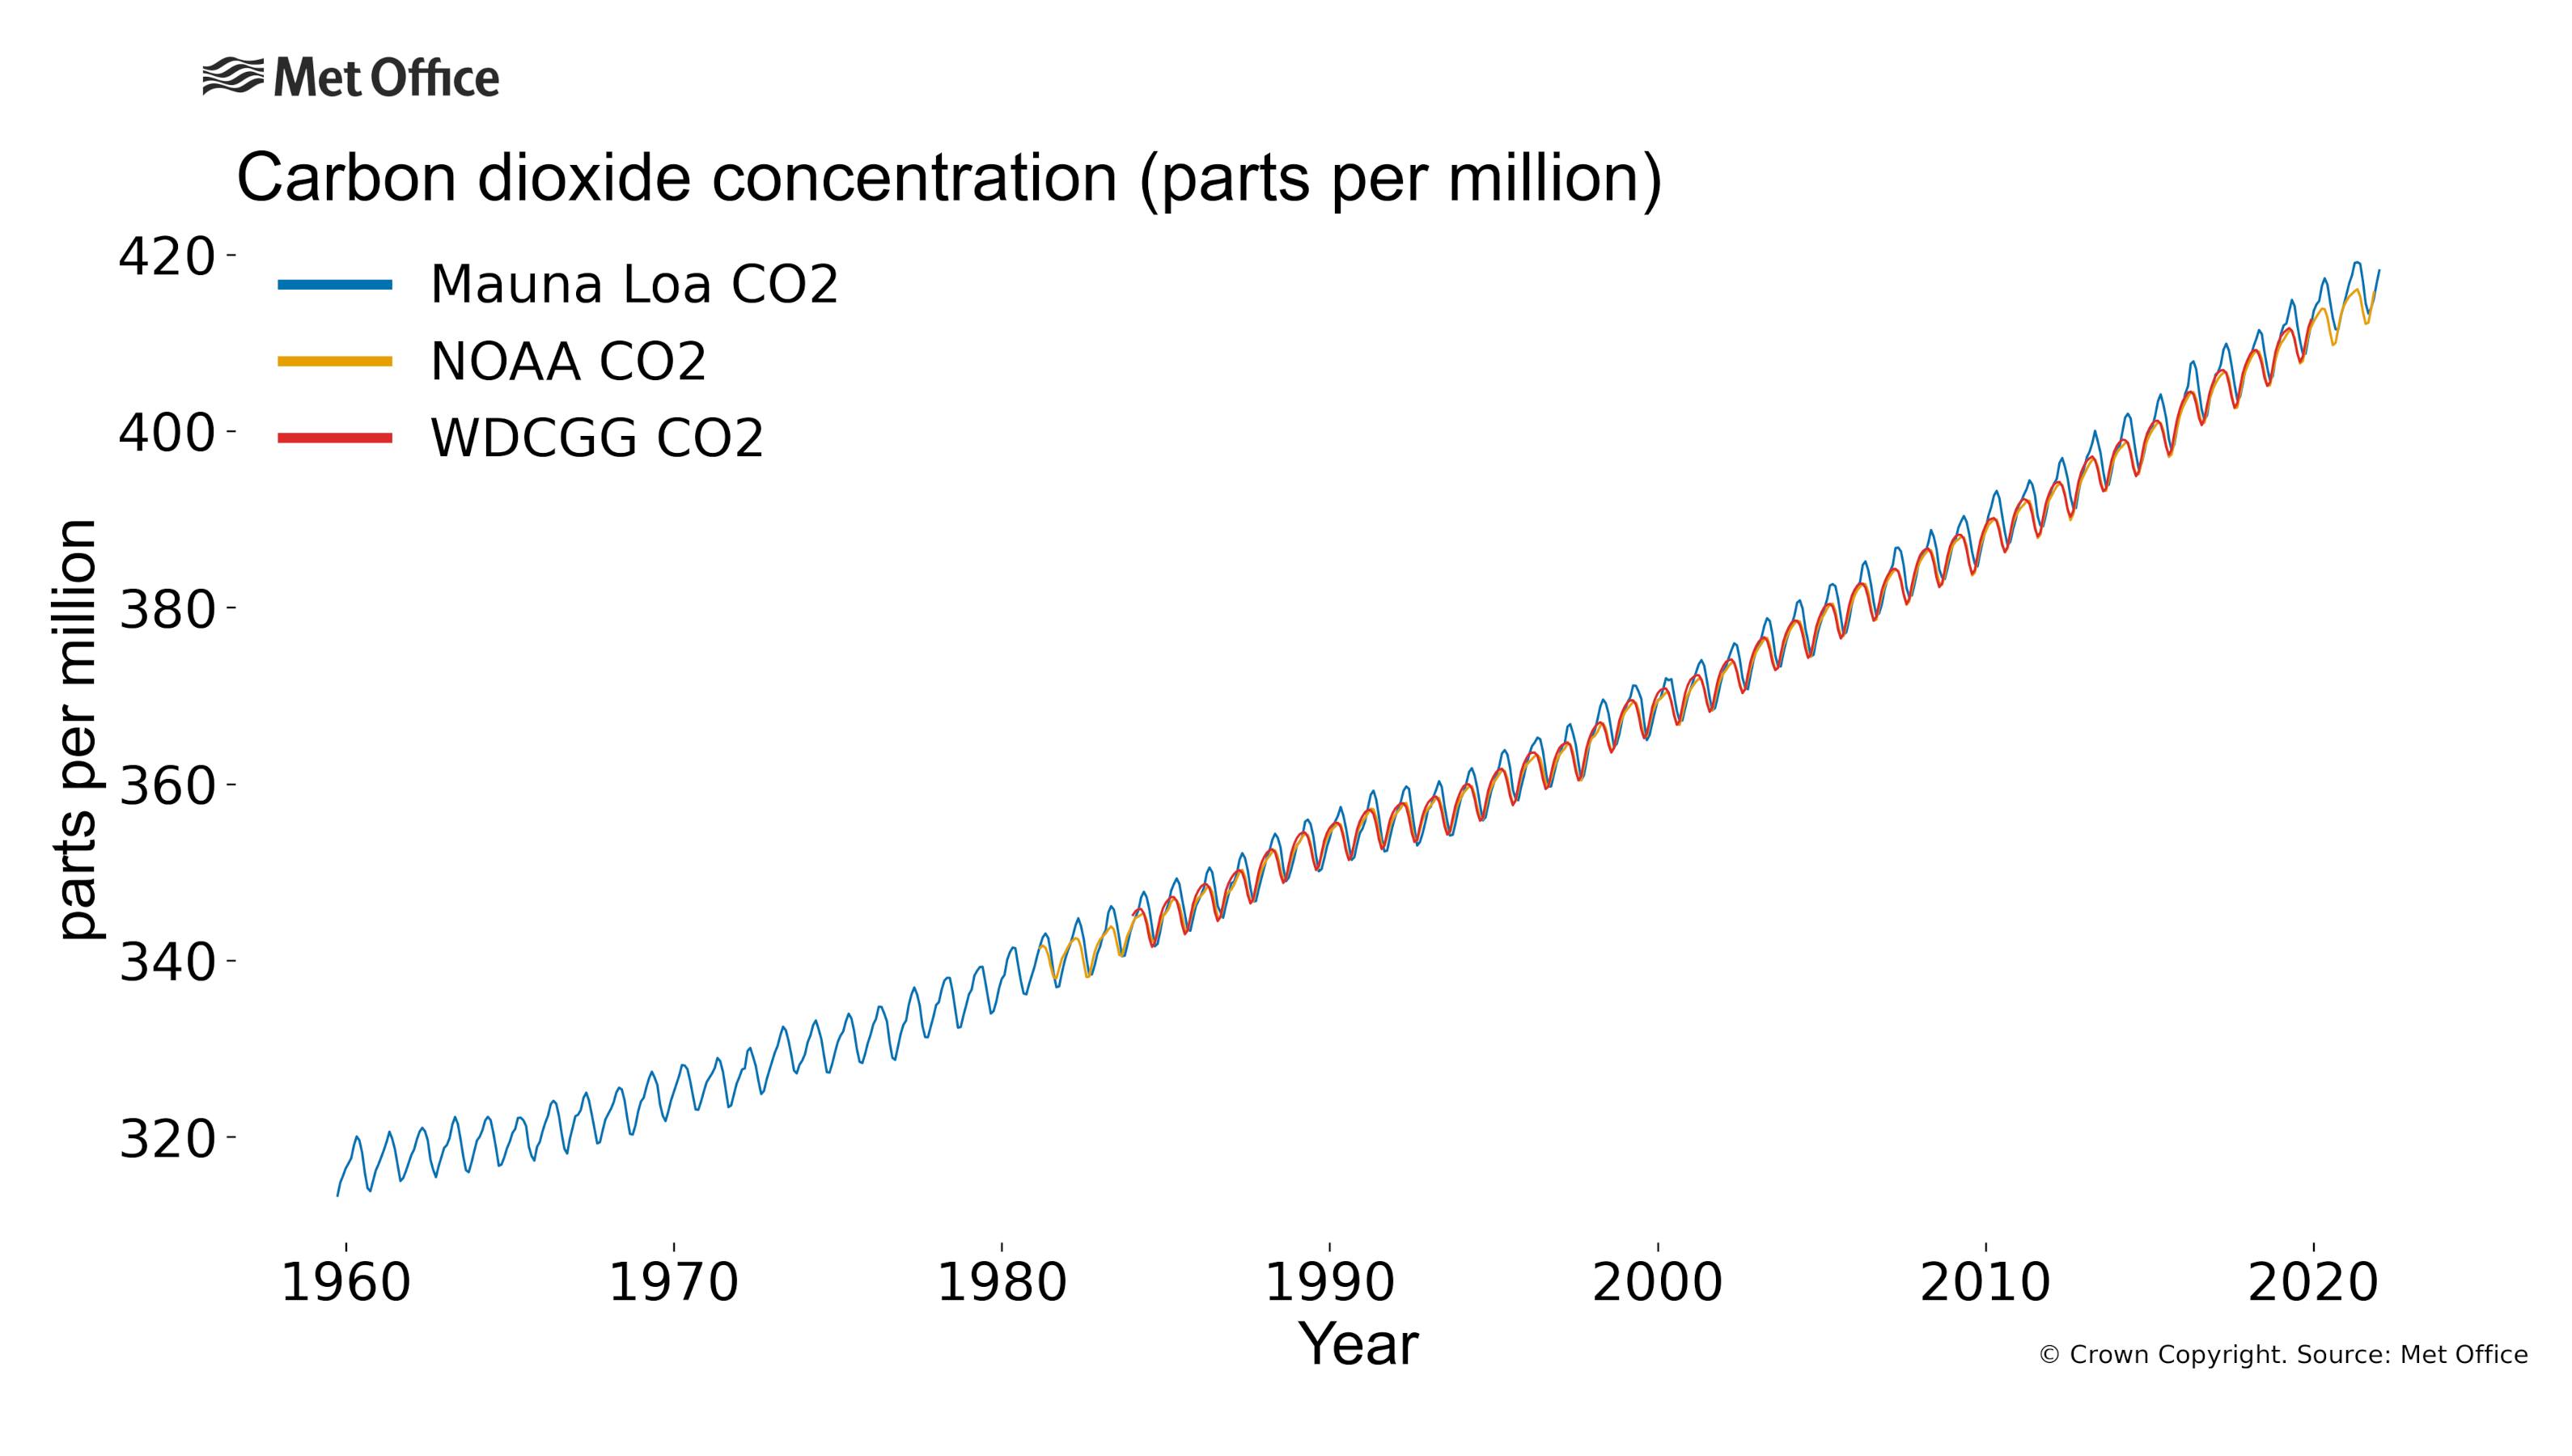 Graph showing the rising level of atmospheric carbon dioxide, showing an increase from roughly 320 parts per million in 1960 to over 400 parts per million in 2021.